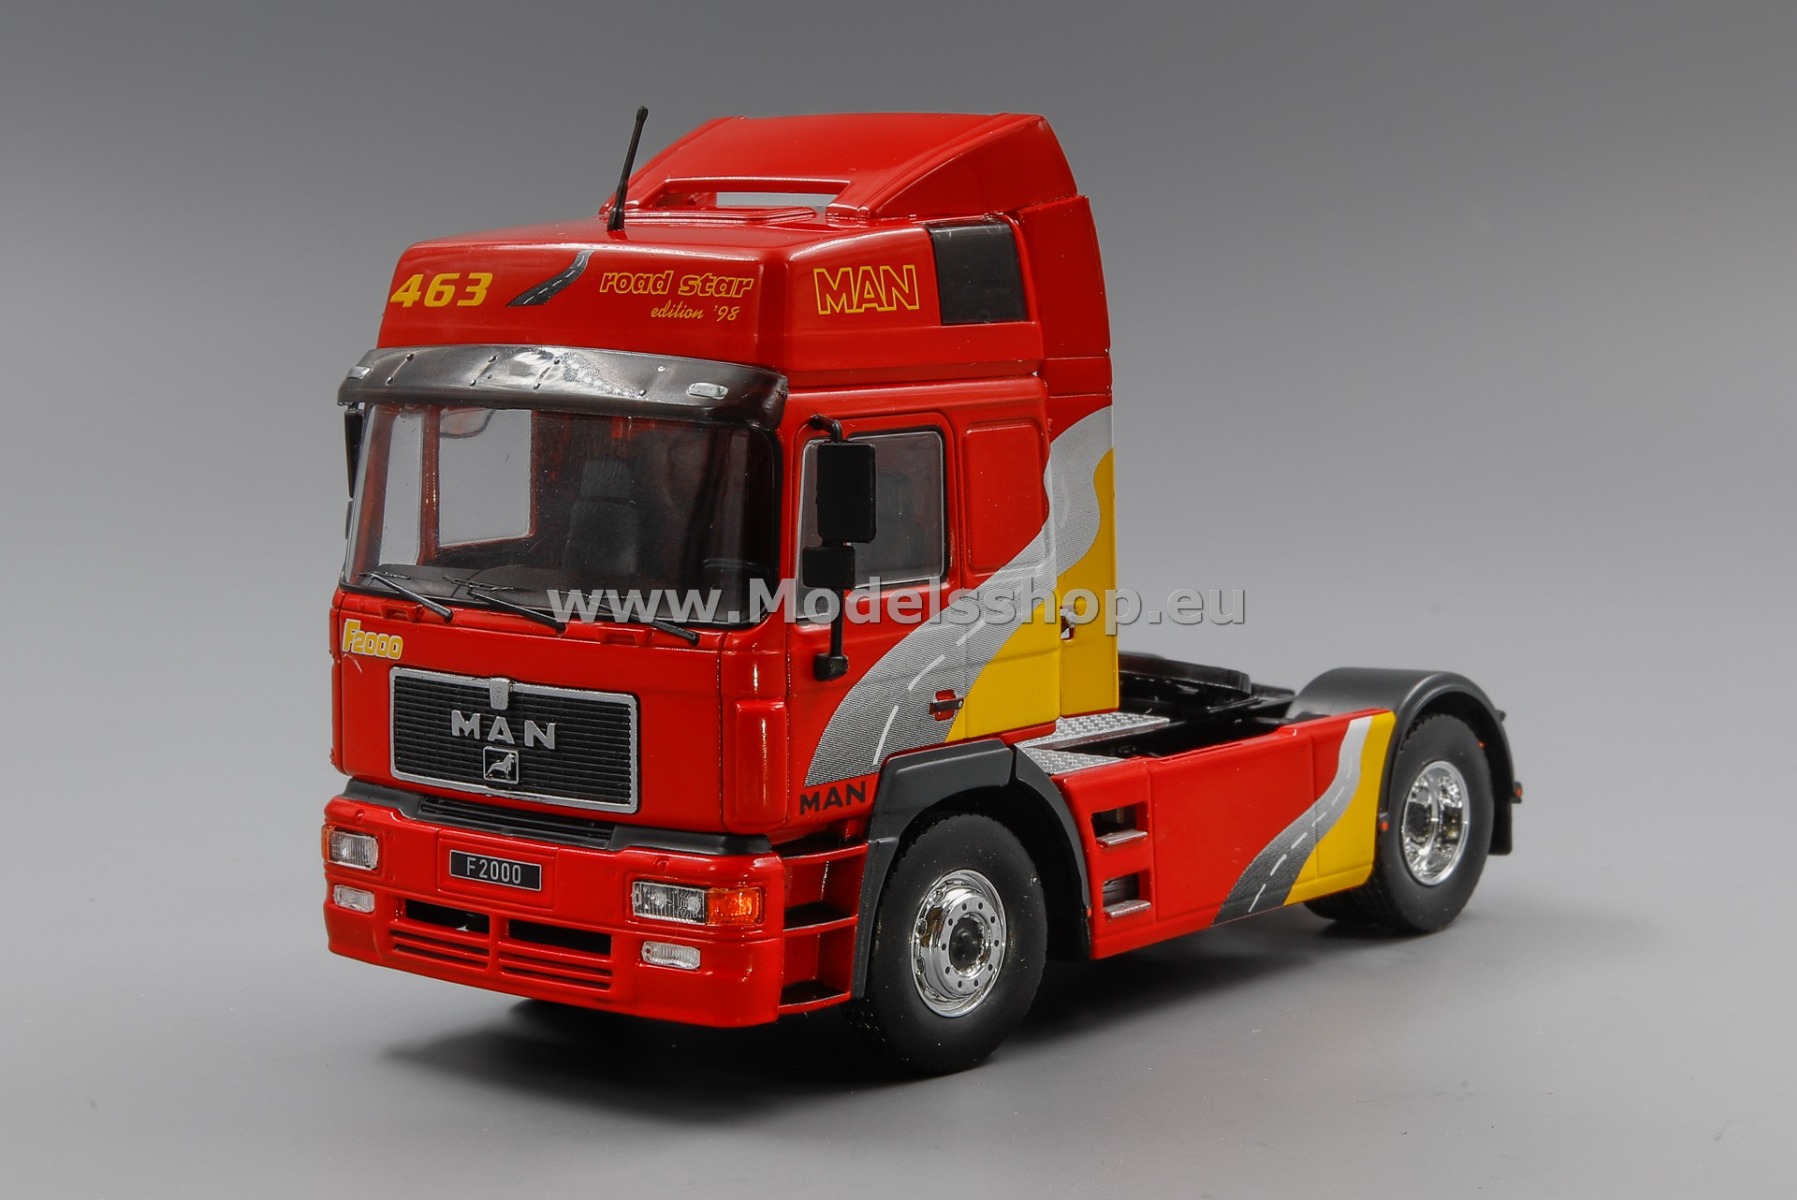 IXO TR138.22 MAN F 2000 tractor truck, 1994 /red - decorated/